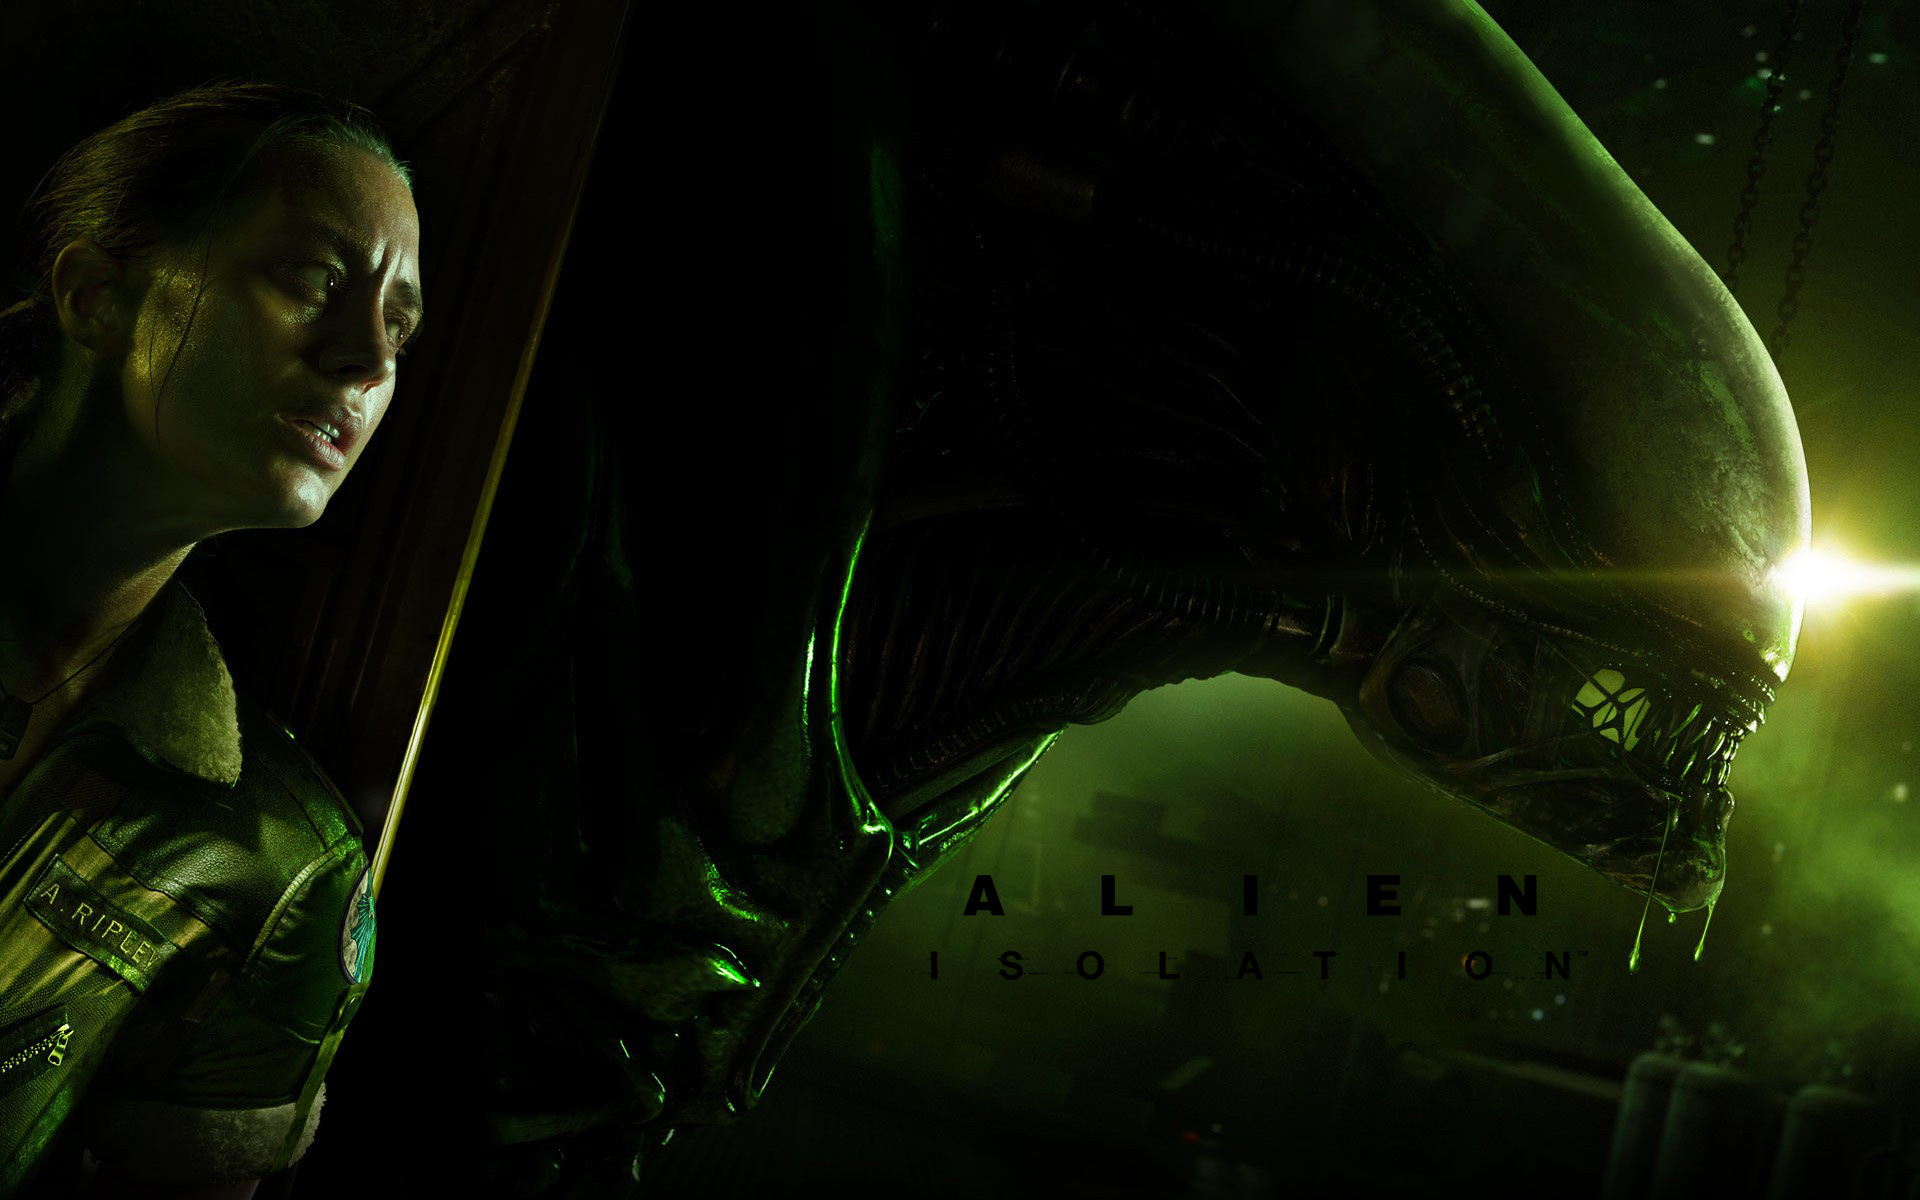 “Alien: Isolation” - In Space, No One Can Hear You Scream